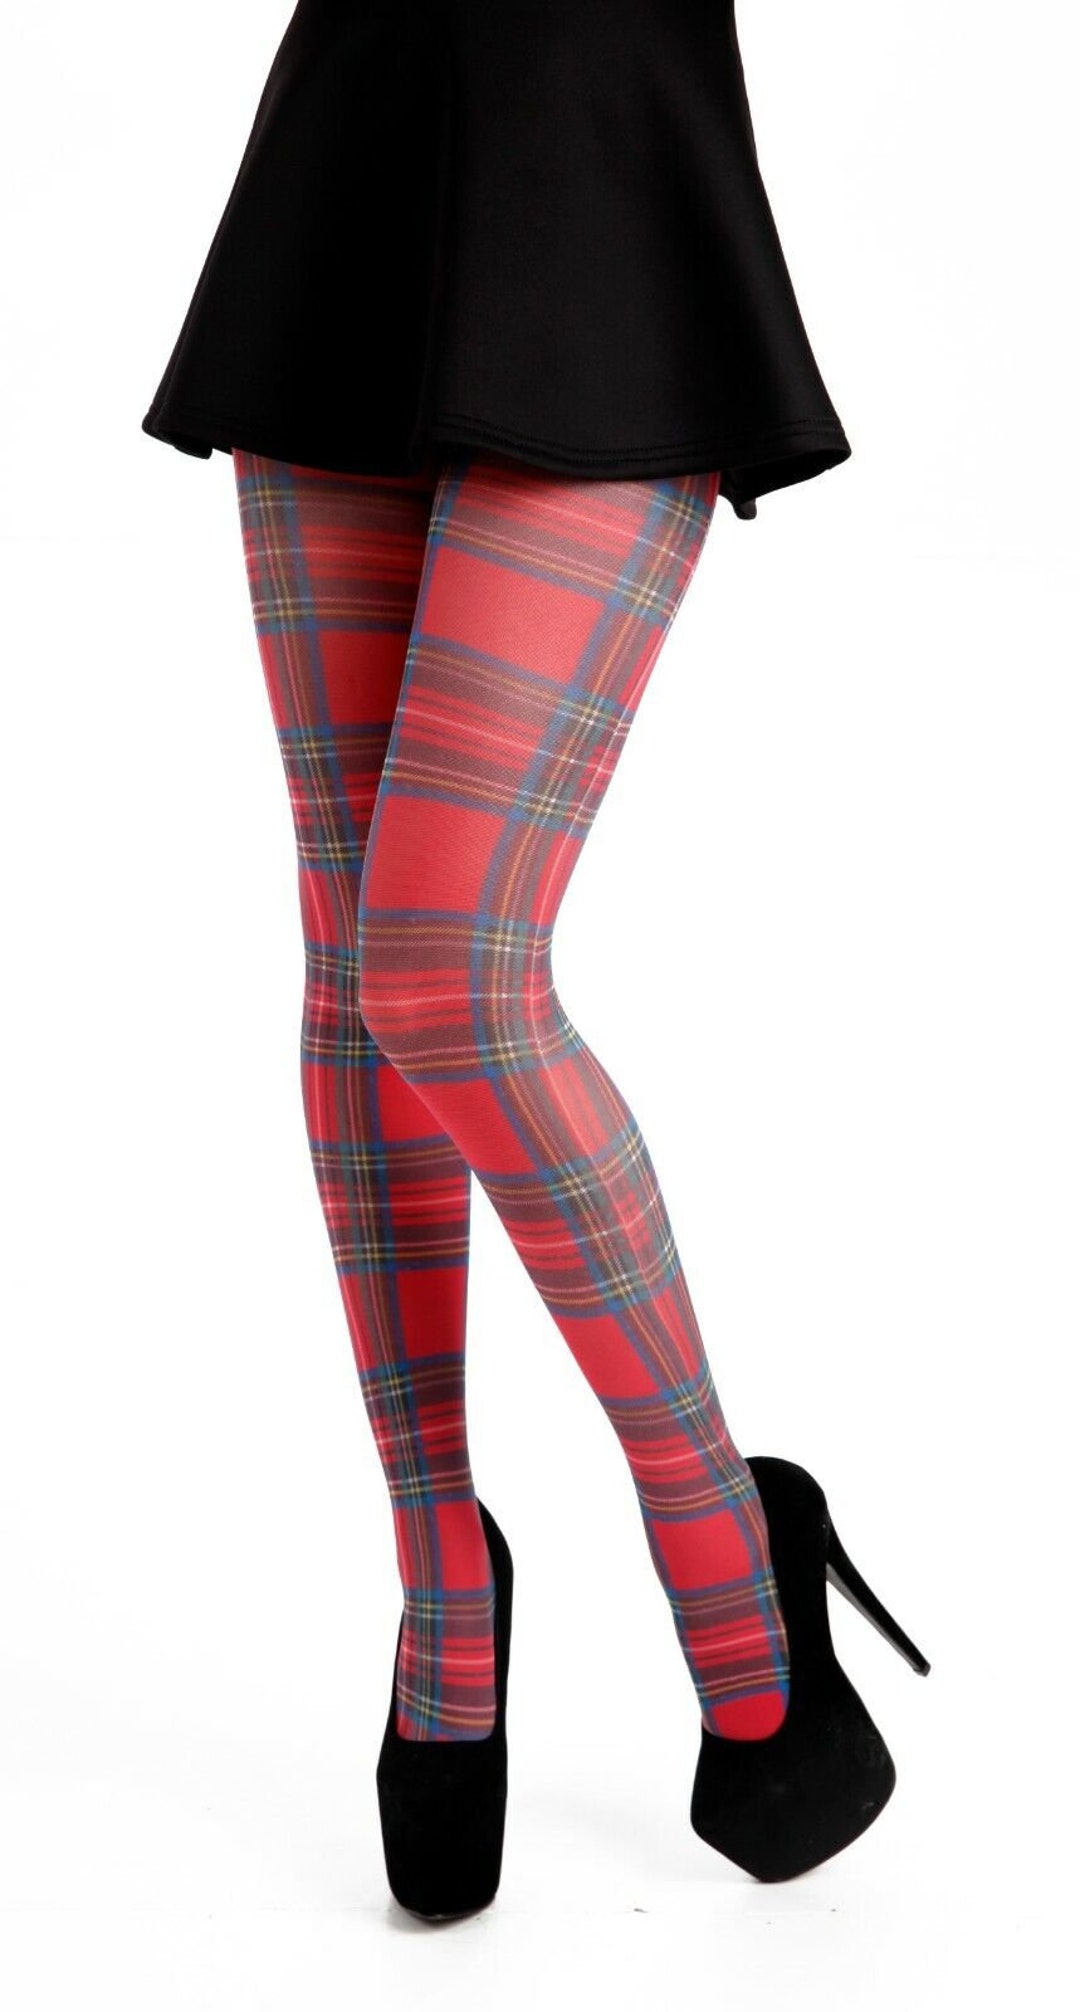 4 Styles of Scottish Tartan / Argyle Print Tights Available made in ...